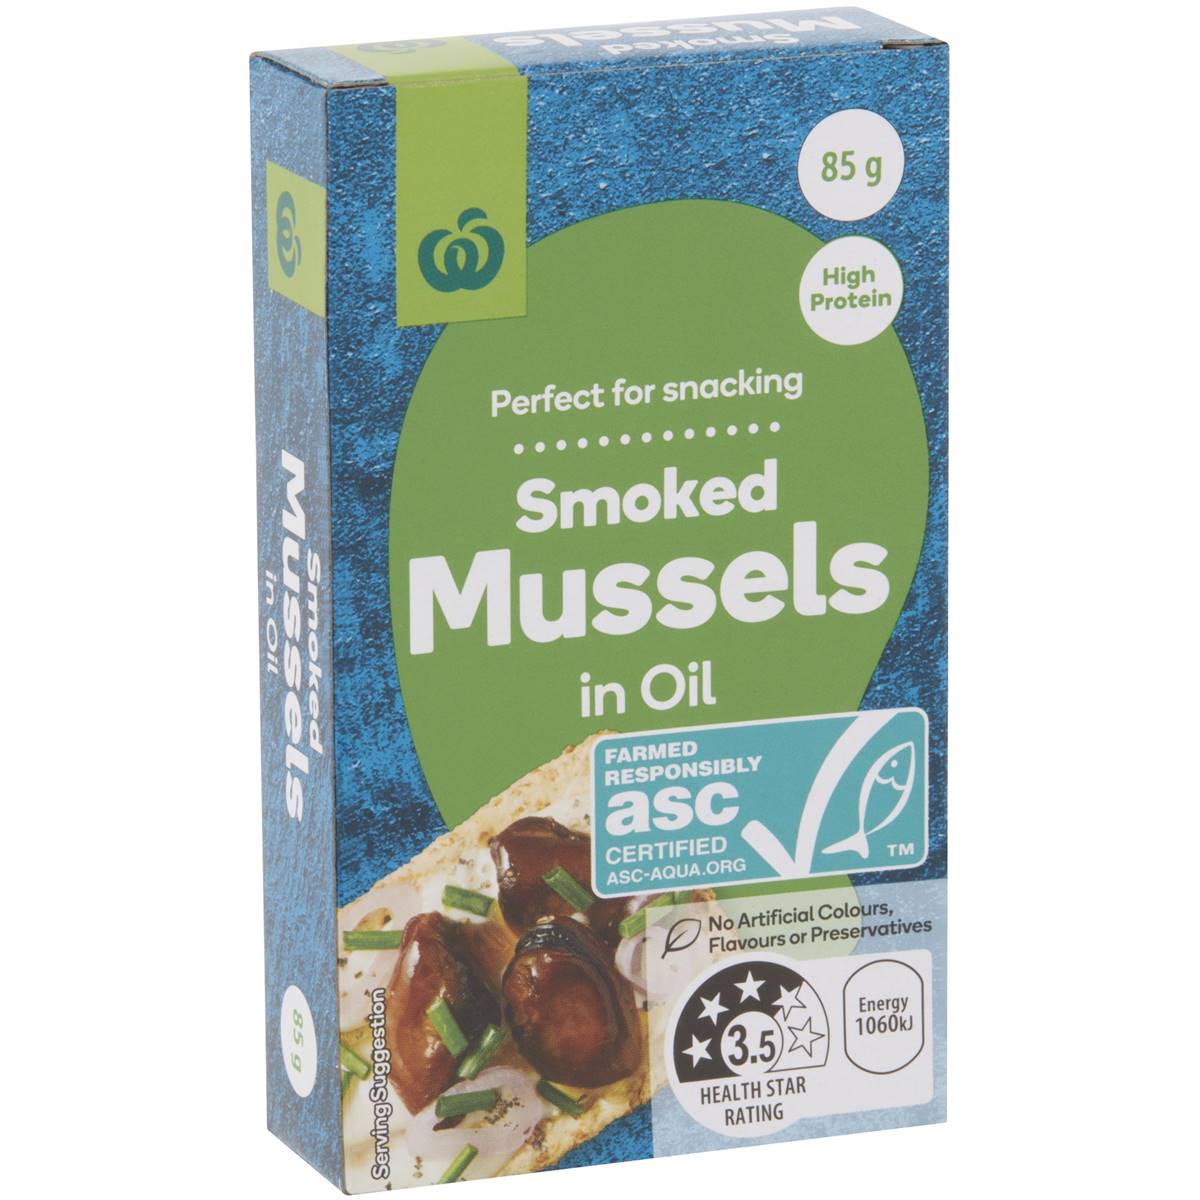 Calories in Woolworths Smoked Mussels In Oil